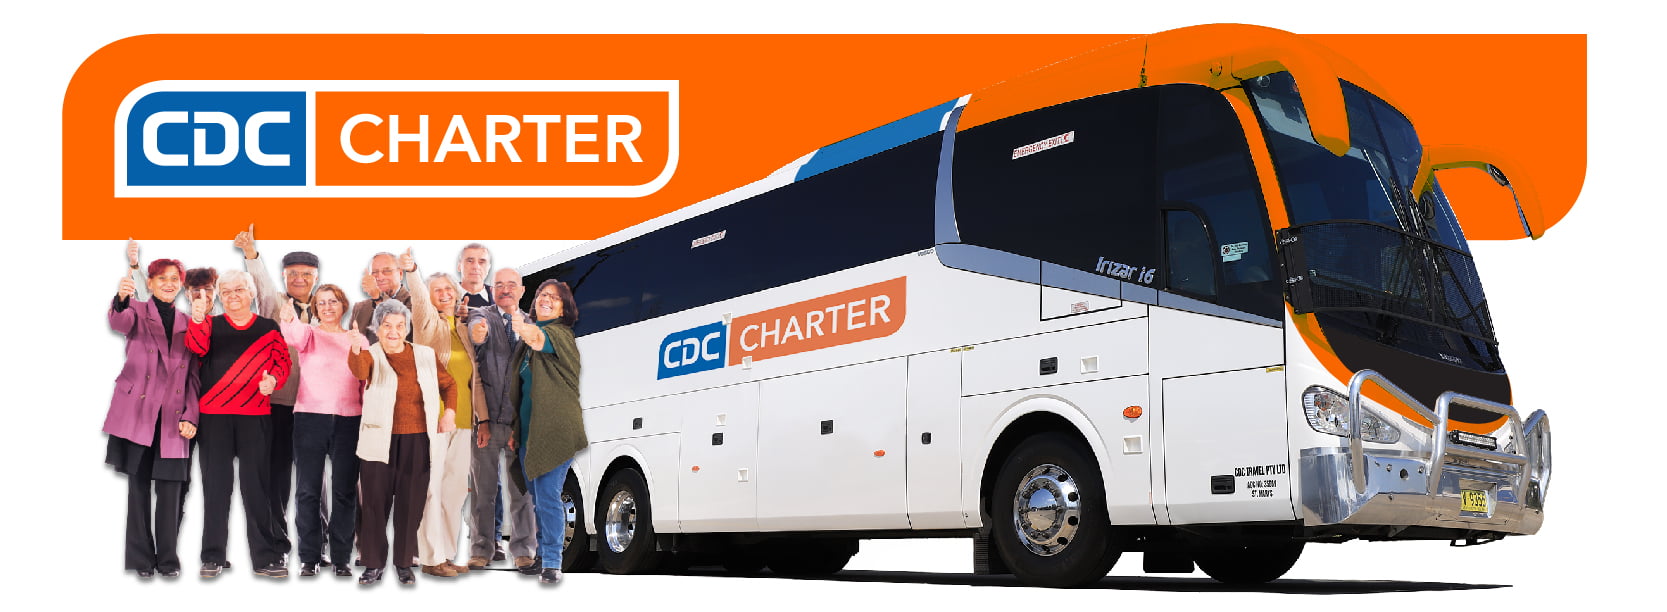 CDC Charter Bus